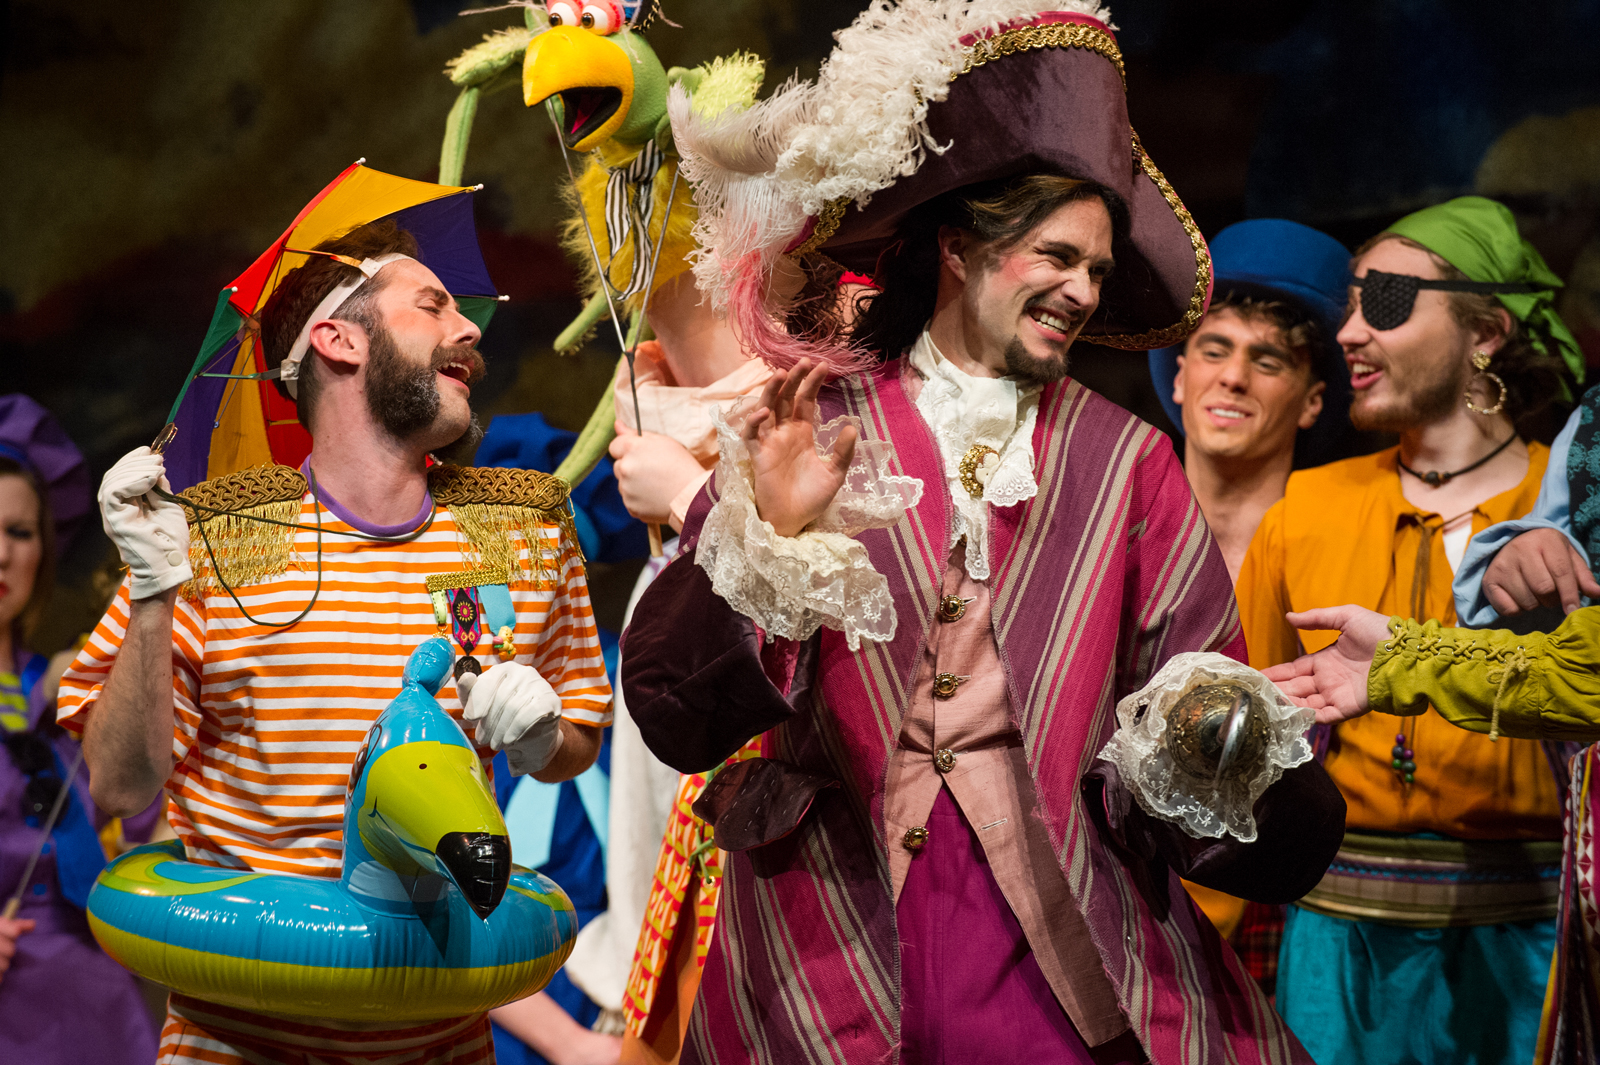 Theatre students in pirate costumes